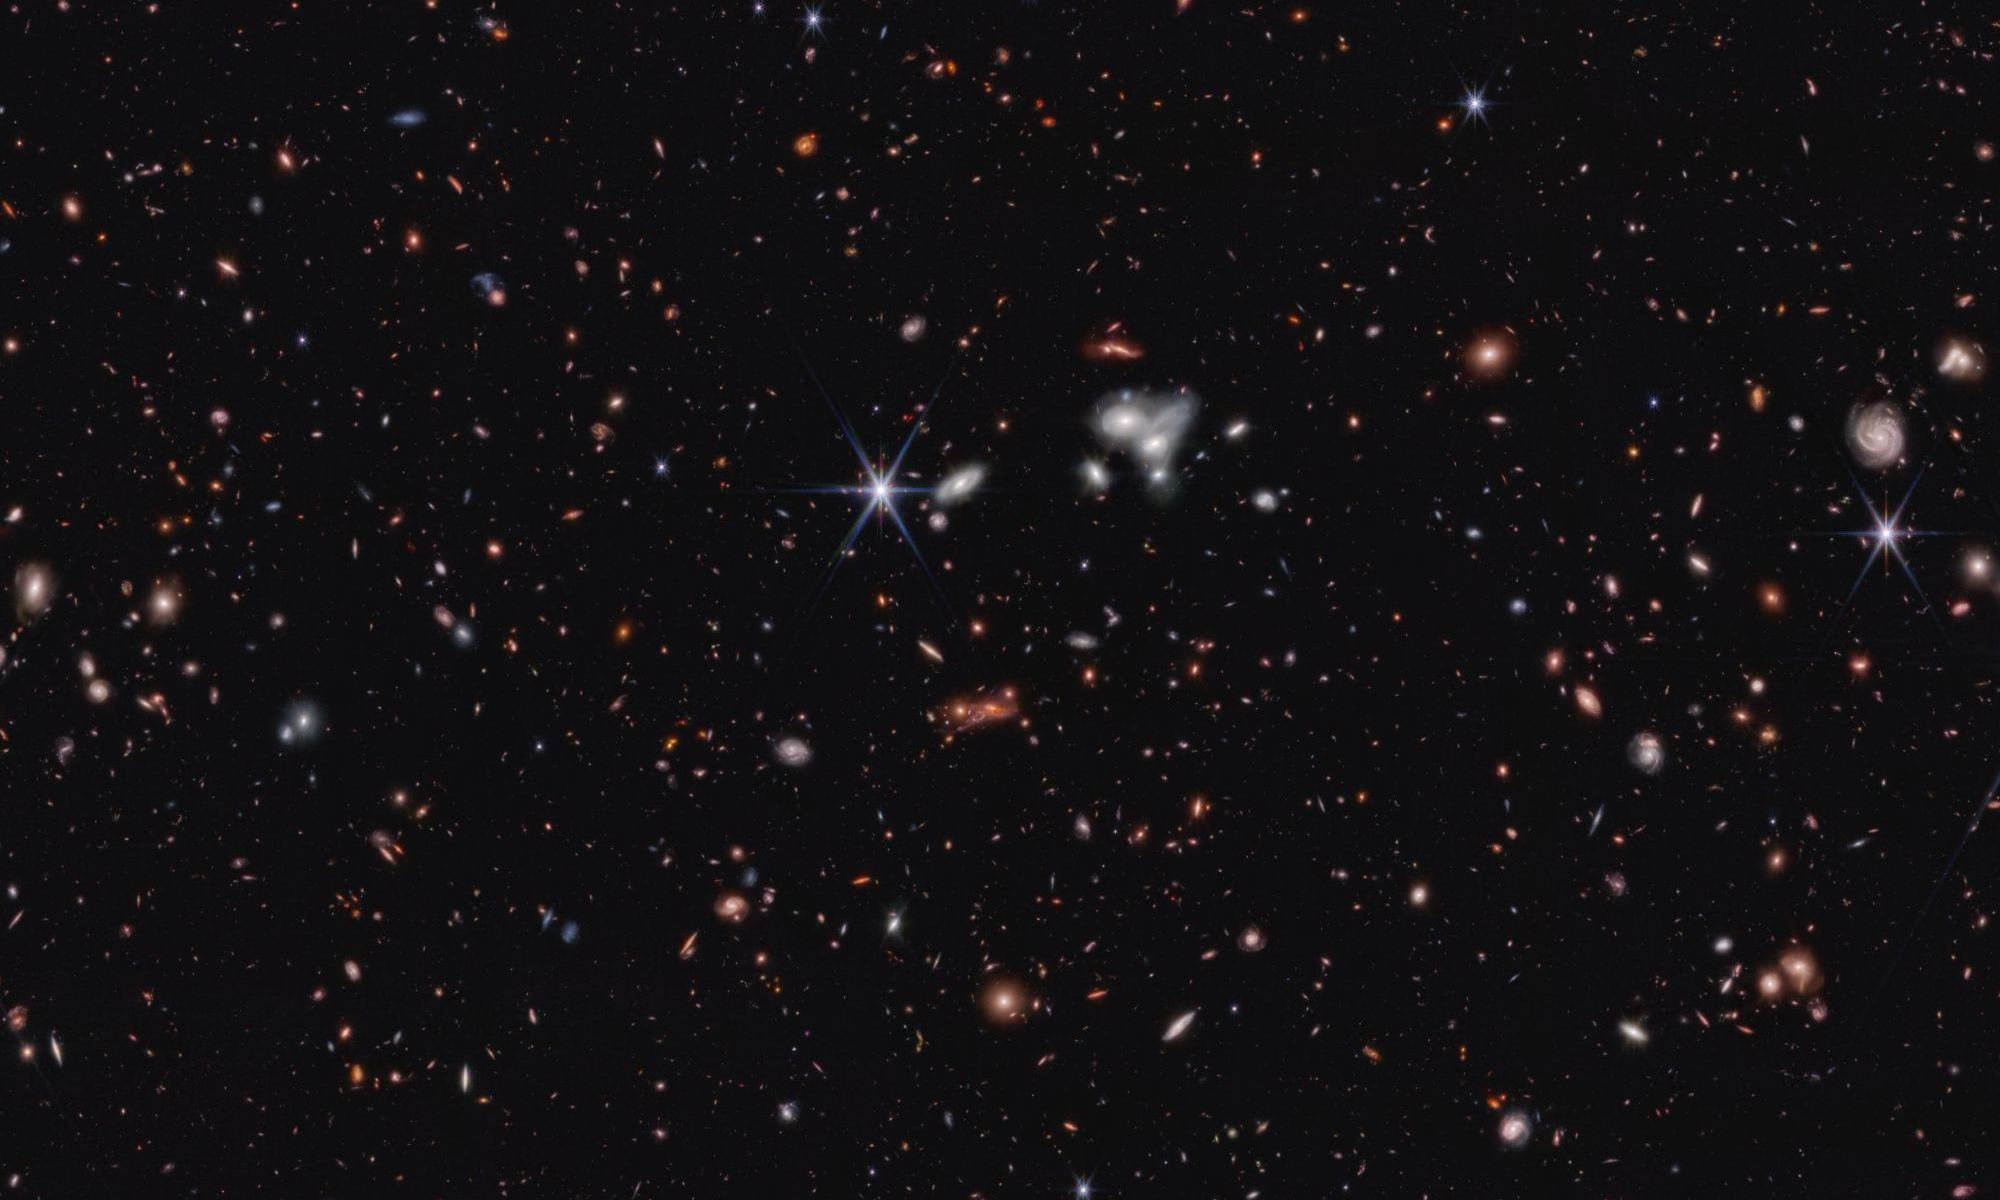 A zoomed-in view of images captured by the James Webb Space Telescope in near-infrared light for the Cosmic Evolution Early Release Science (CEERS) Survey. A galaxy assembling itself JWST found in this view has the most distant supermassive black hole seen to date.Credit: NASA, ESA, CSA, Steve Finkelstein (UT Austin), Micaela Bagley (UT Austin), Rebecca Larson (UT Austin).